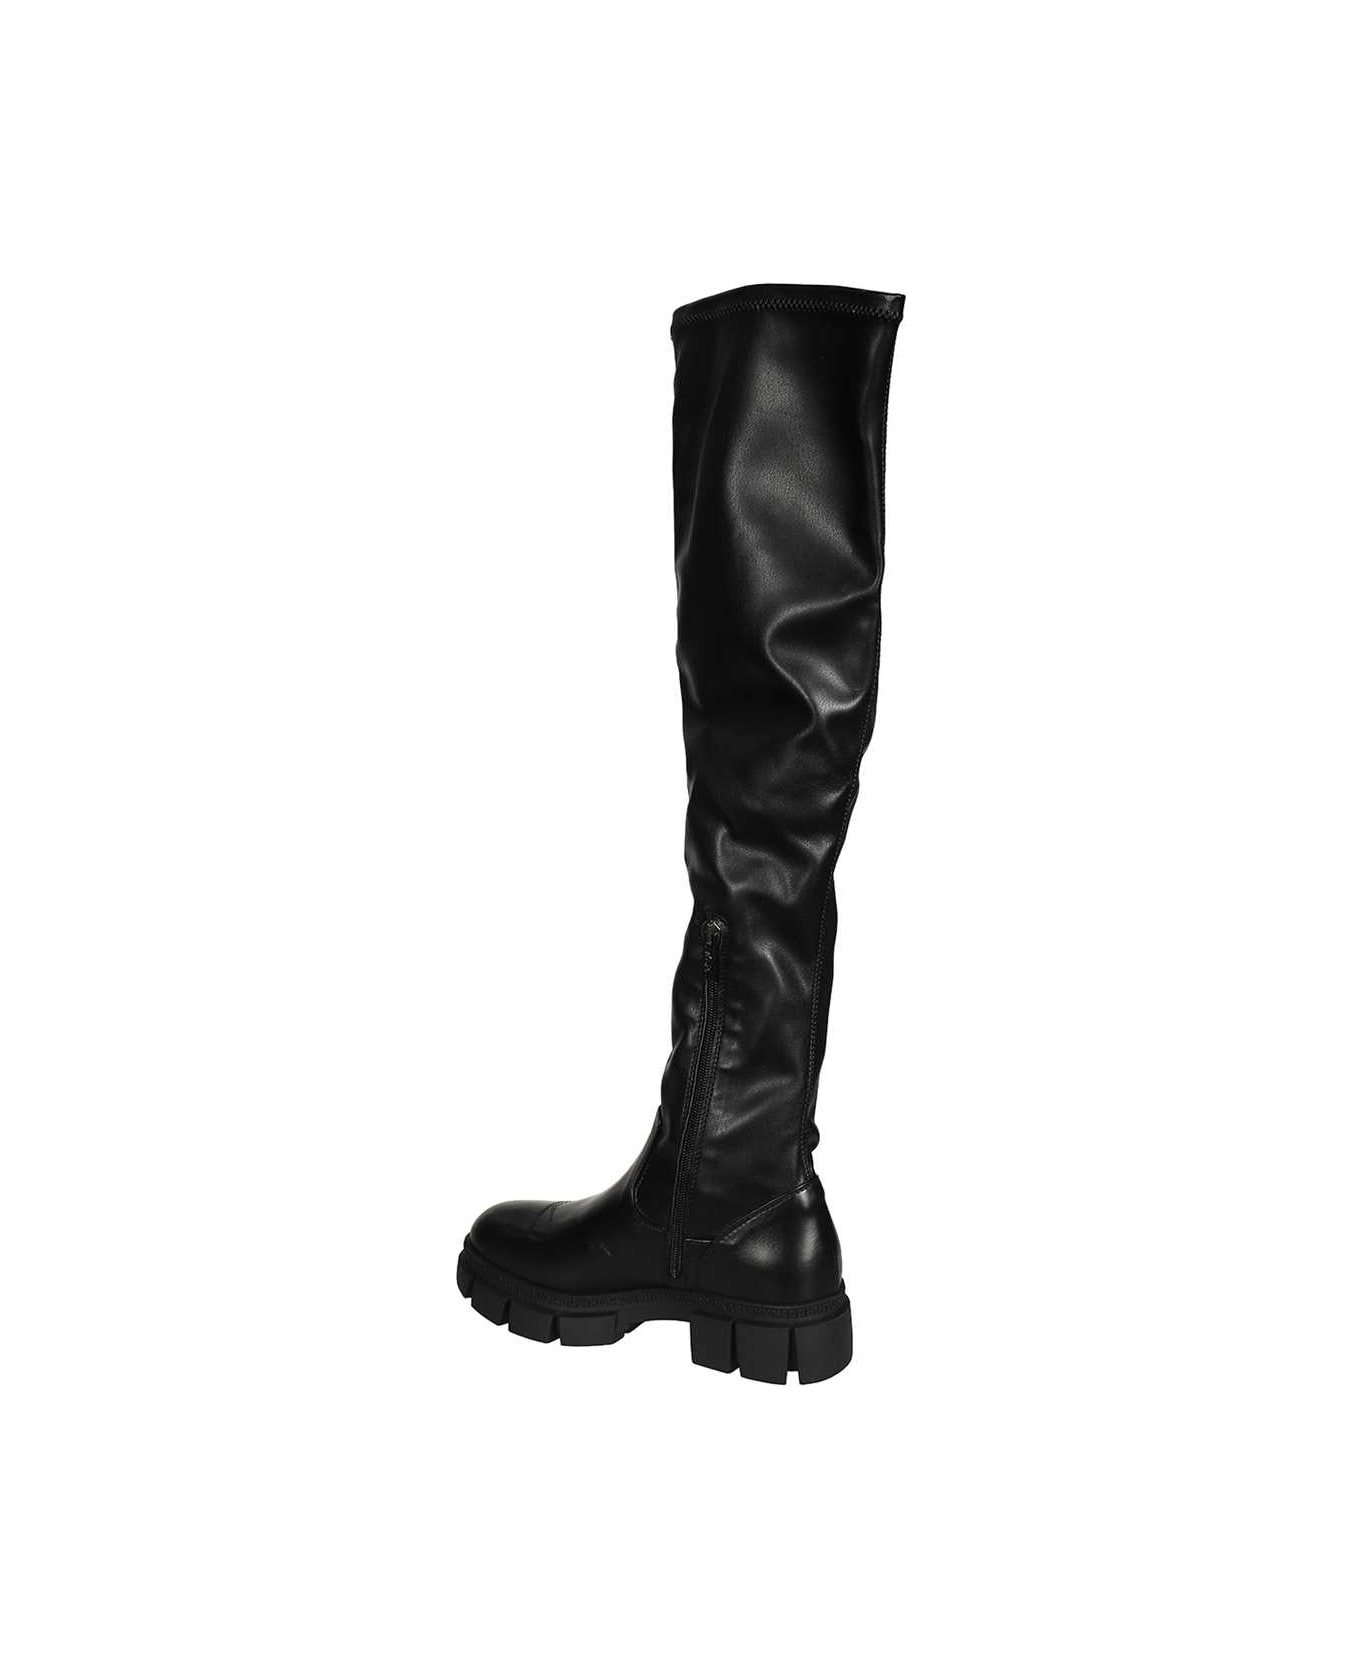 Karl Lagerfeld Over-the-knee Boots - black